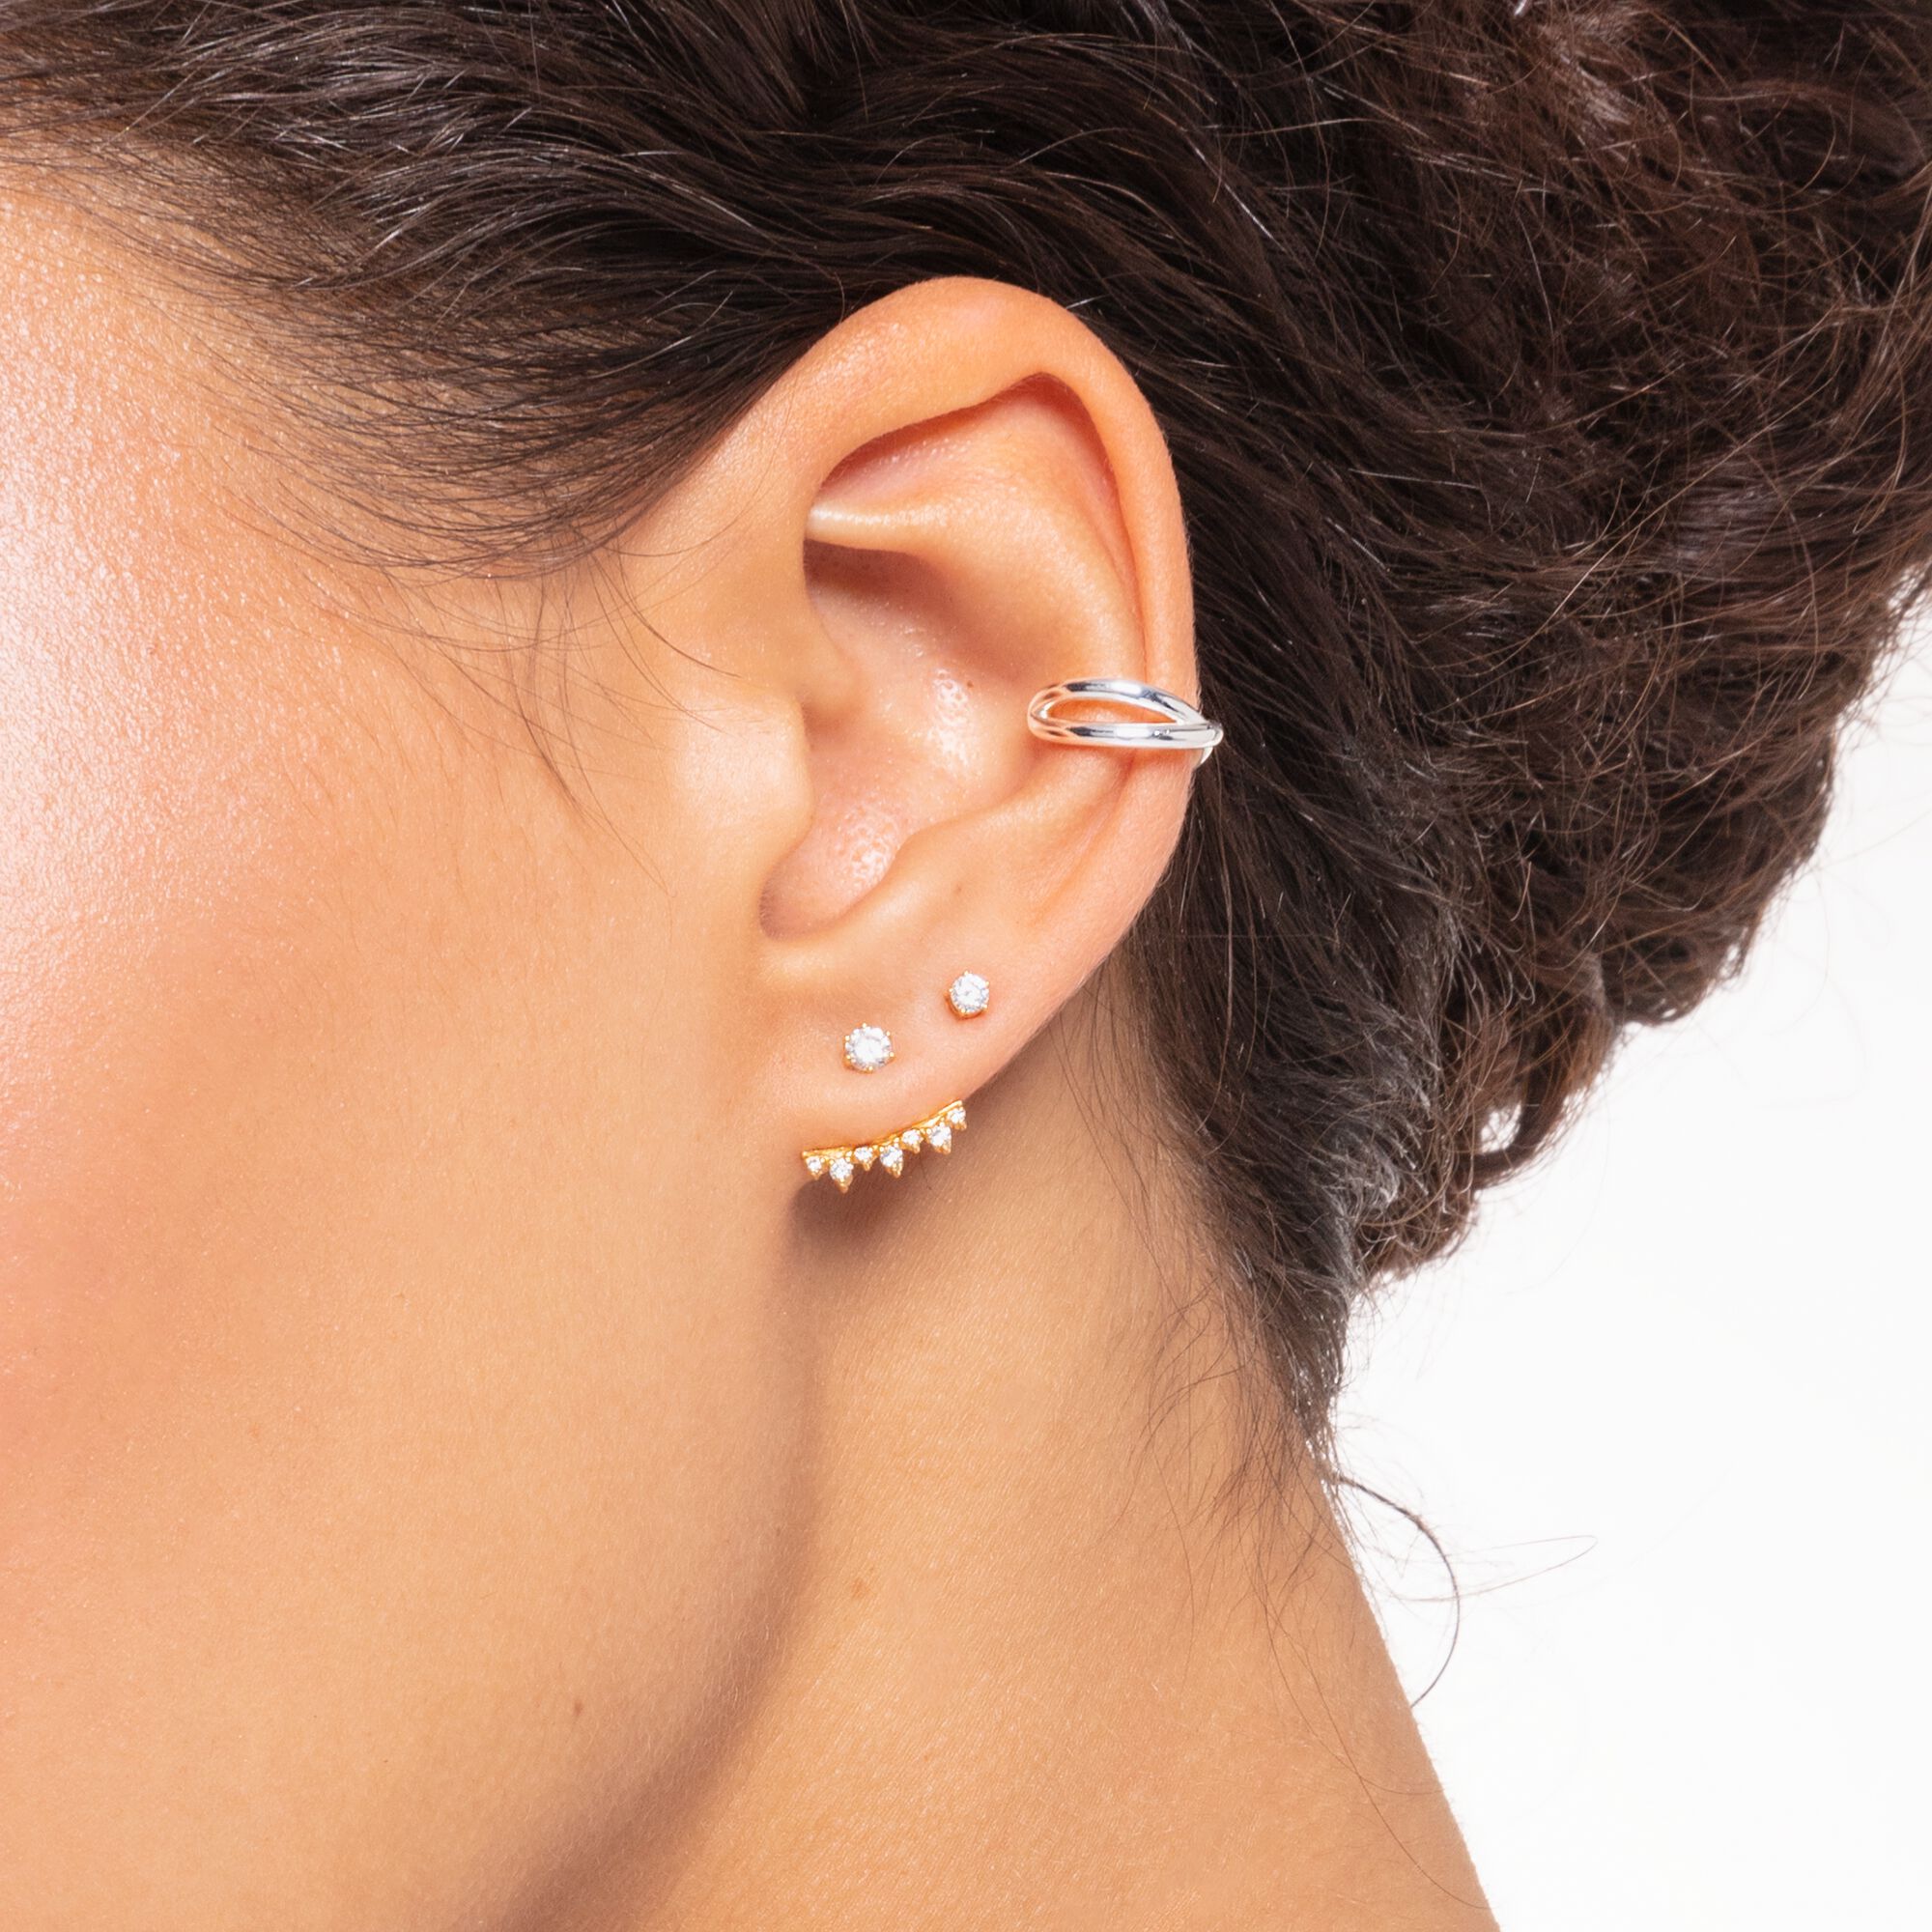 in │ jacket SABO vintage-inspired Ear & earring THOMAS gold